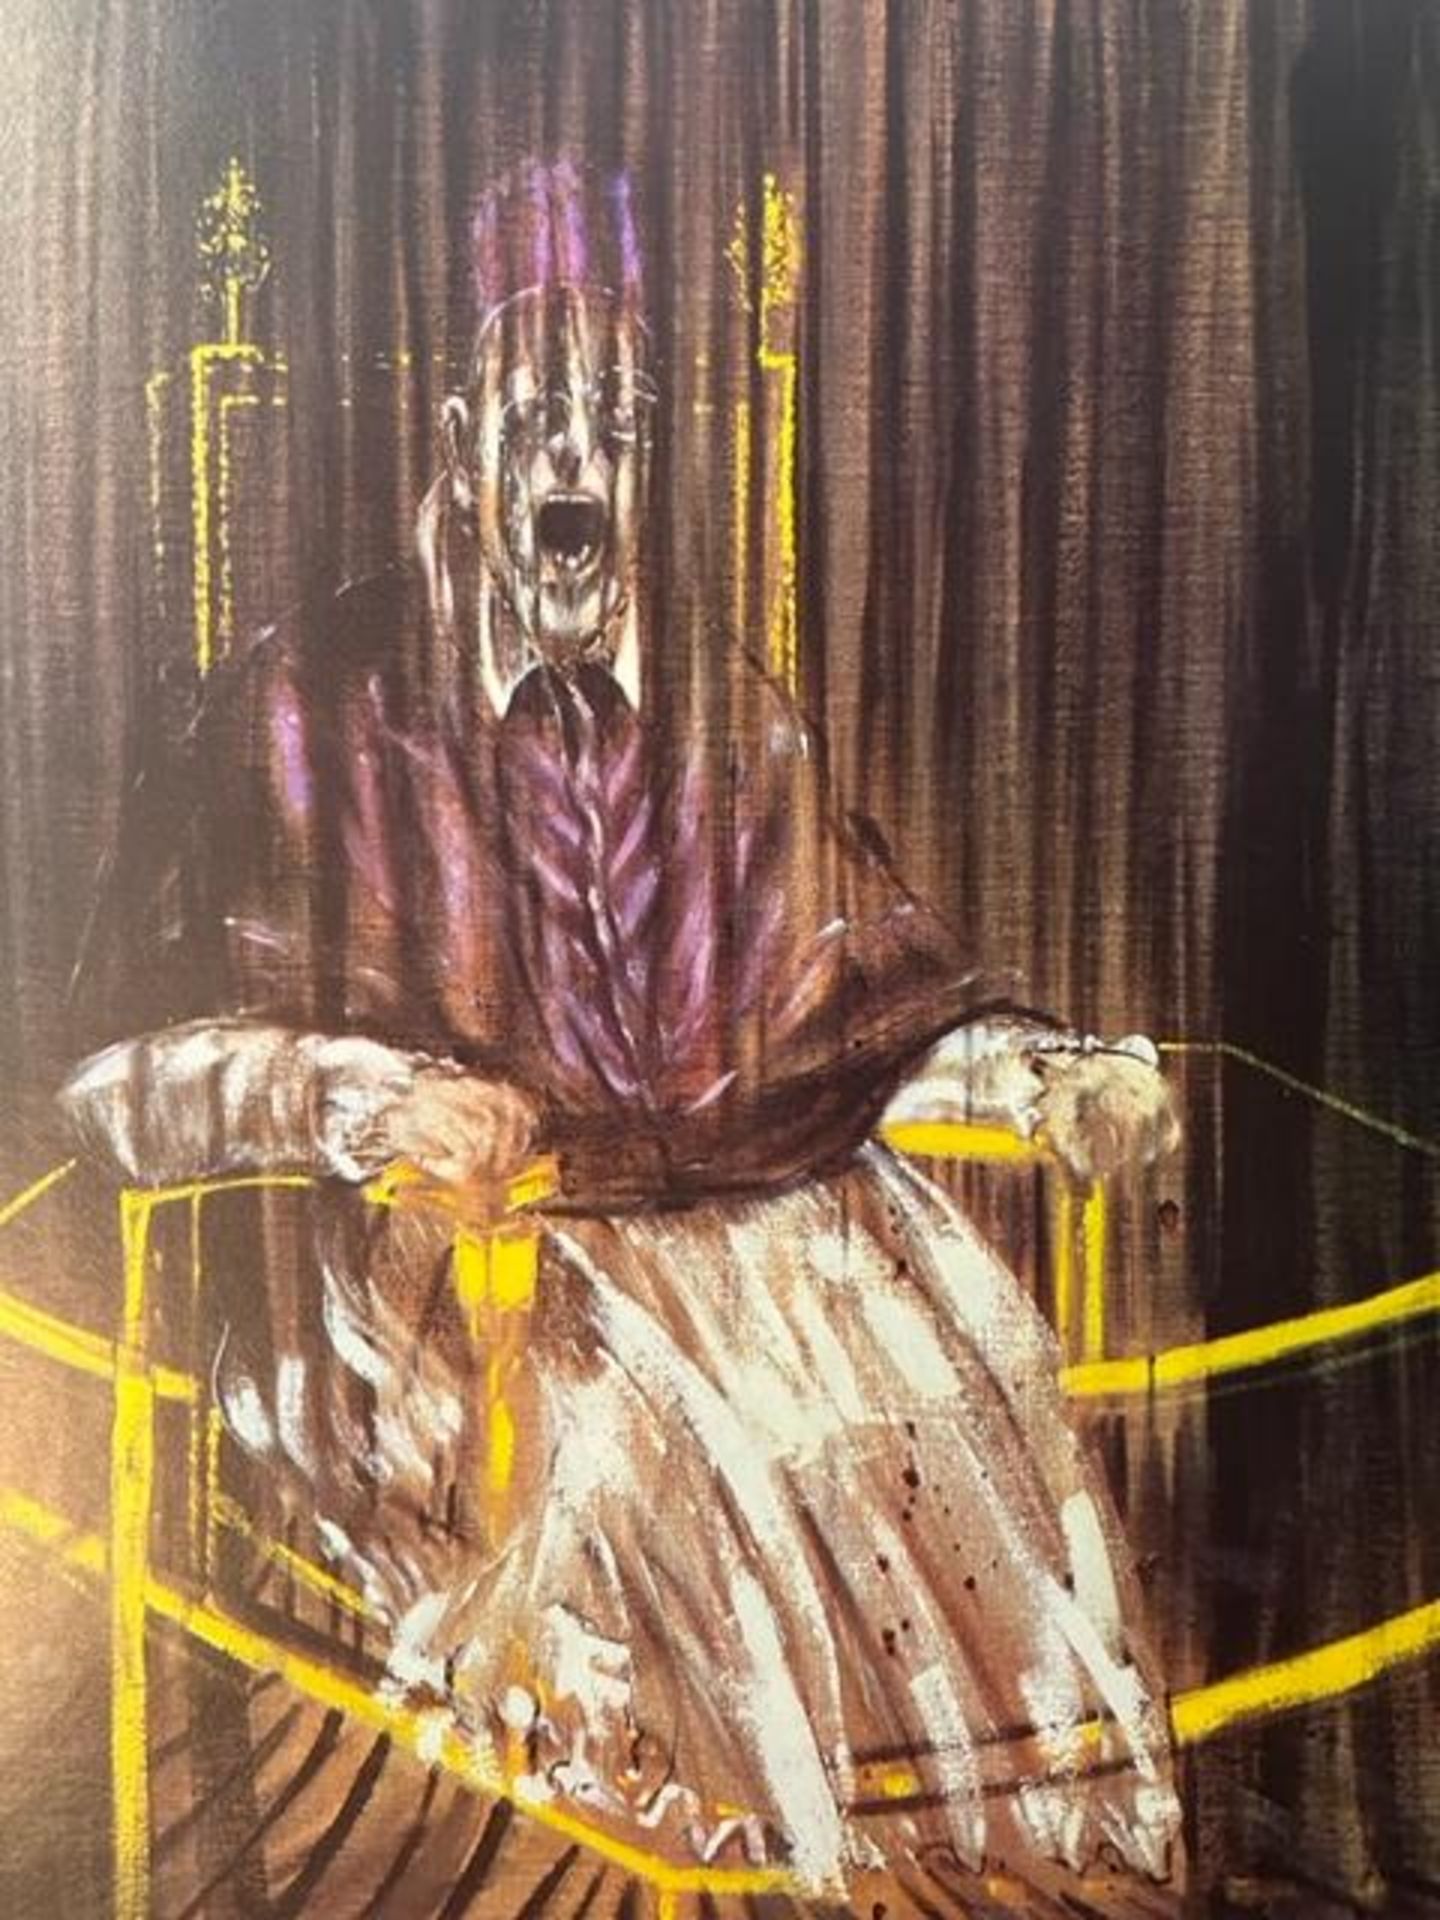 Francis Bacon "Study after Velazques's Portrait of Pope Innocent X" Print. - Image 3 of 6